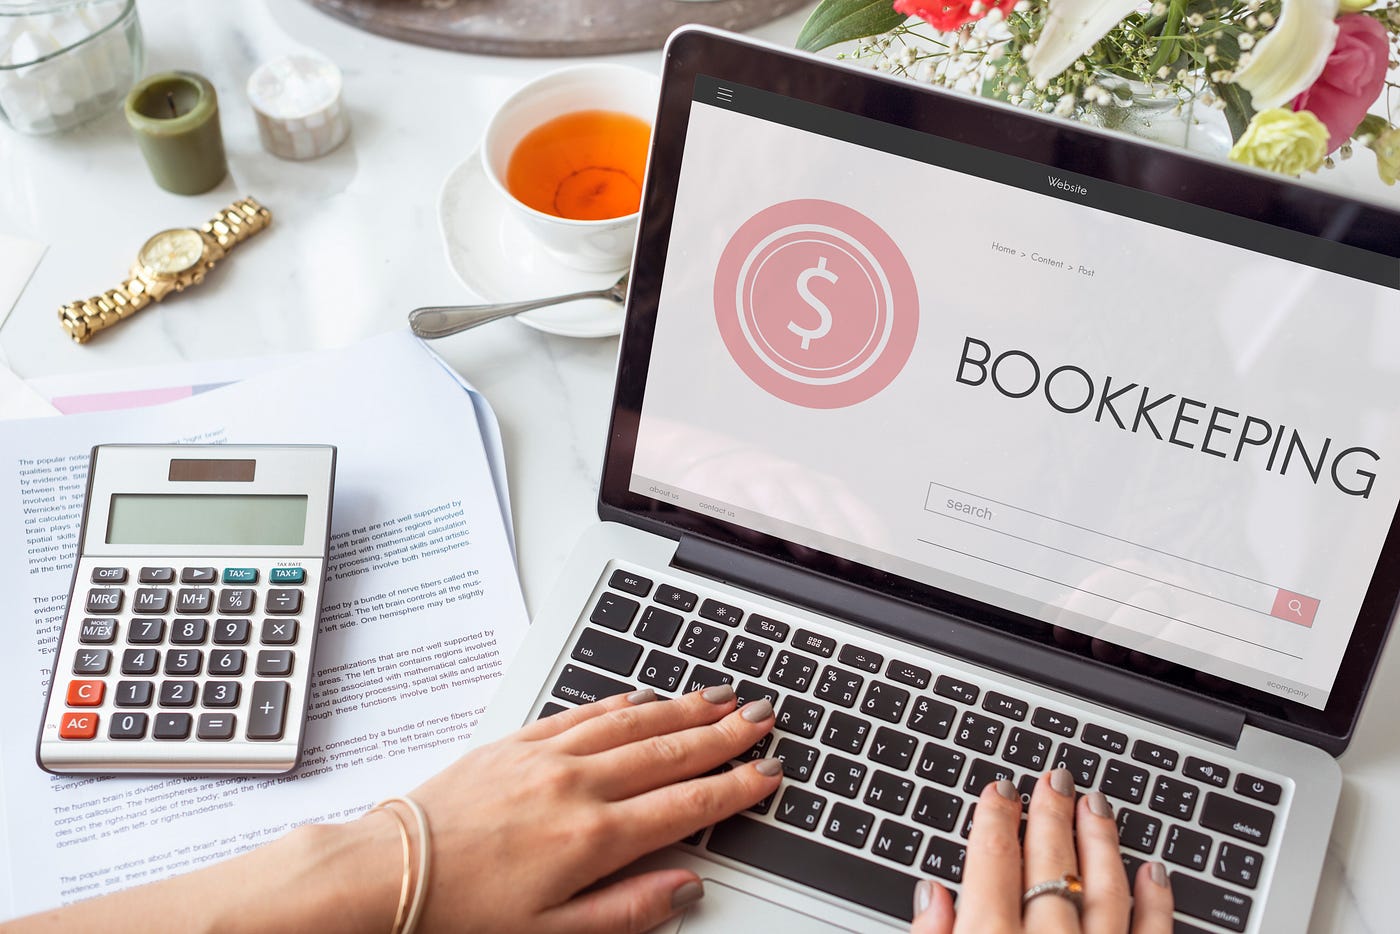 How To Start Online Bookkeeping Business